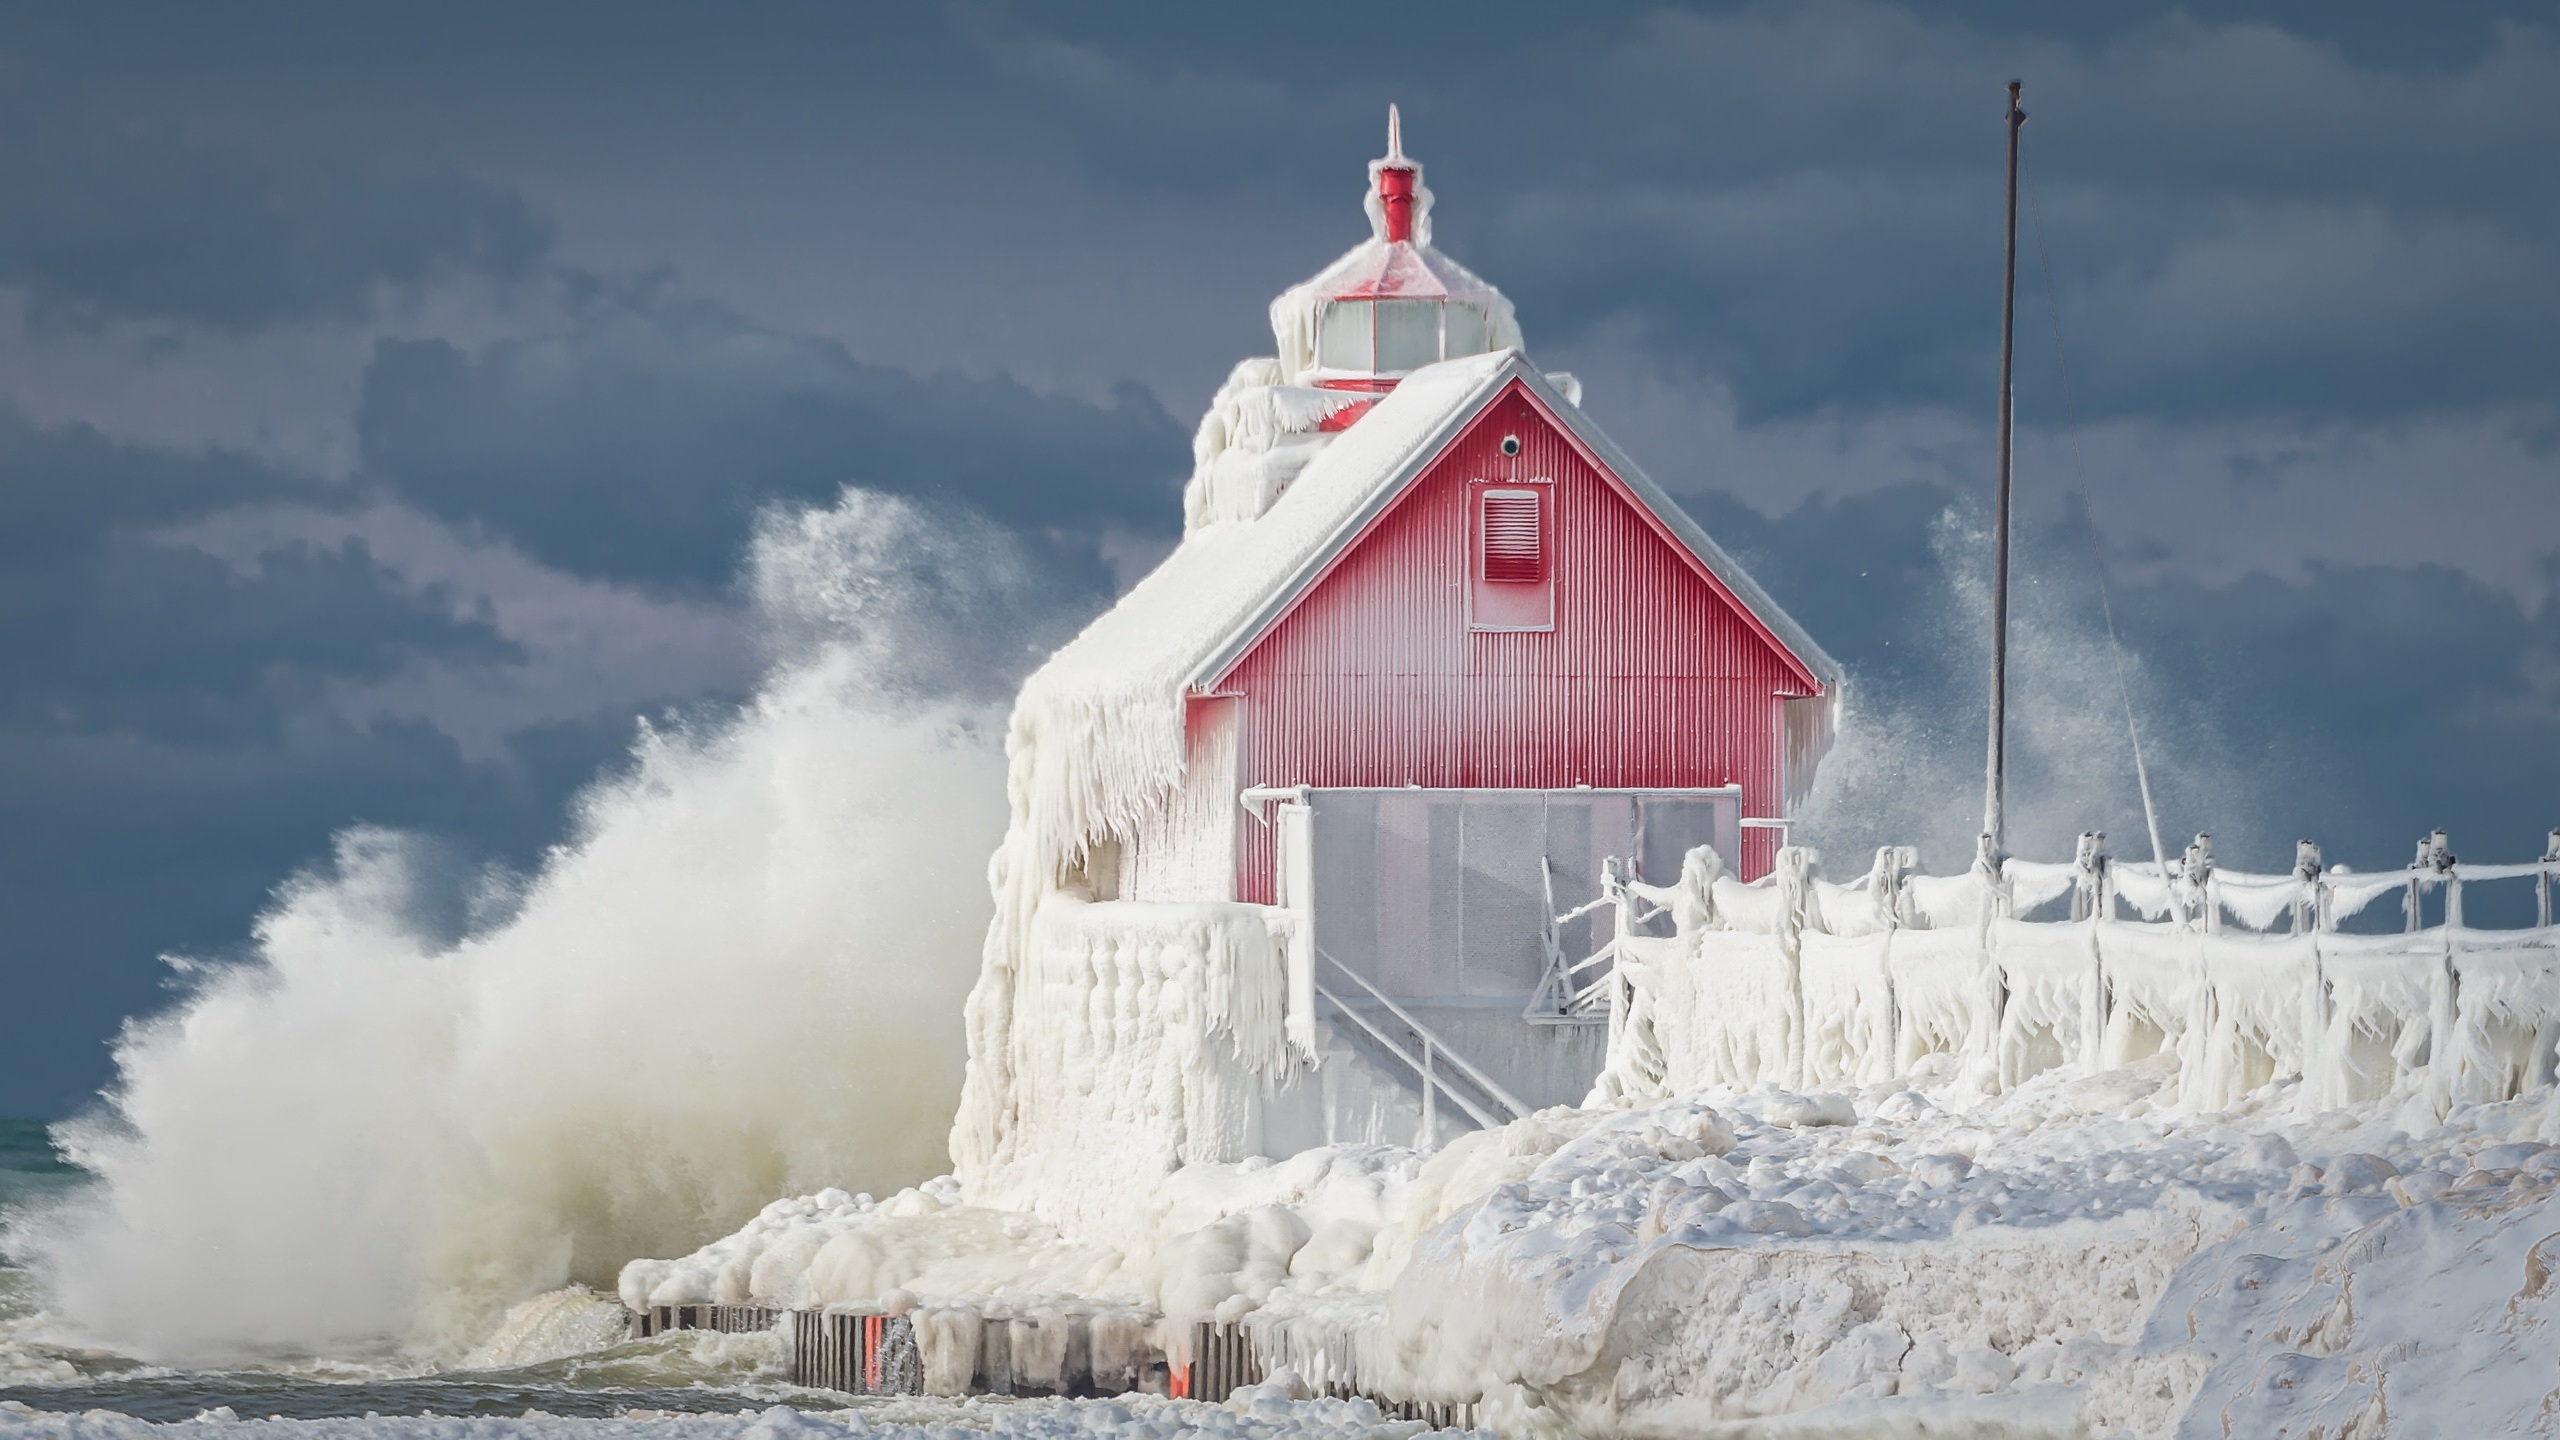 General 2560x1440 winter ice frost cold outdoors snow lighthouse red